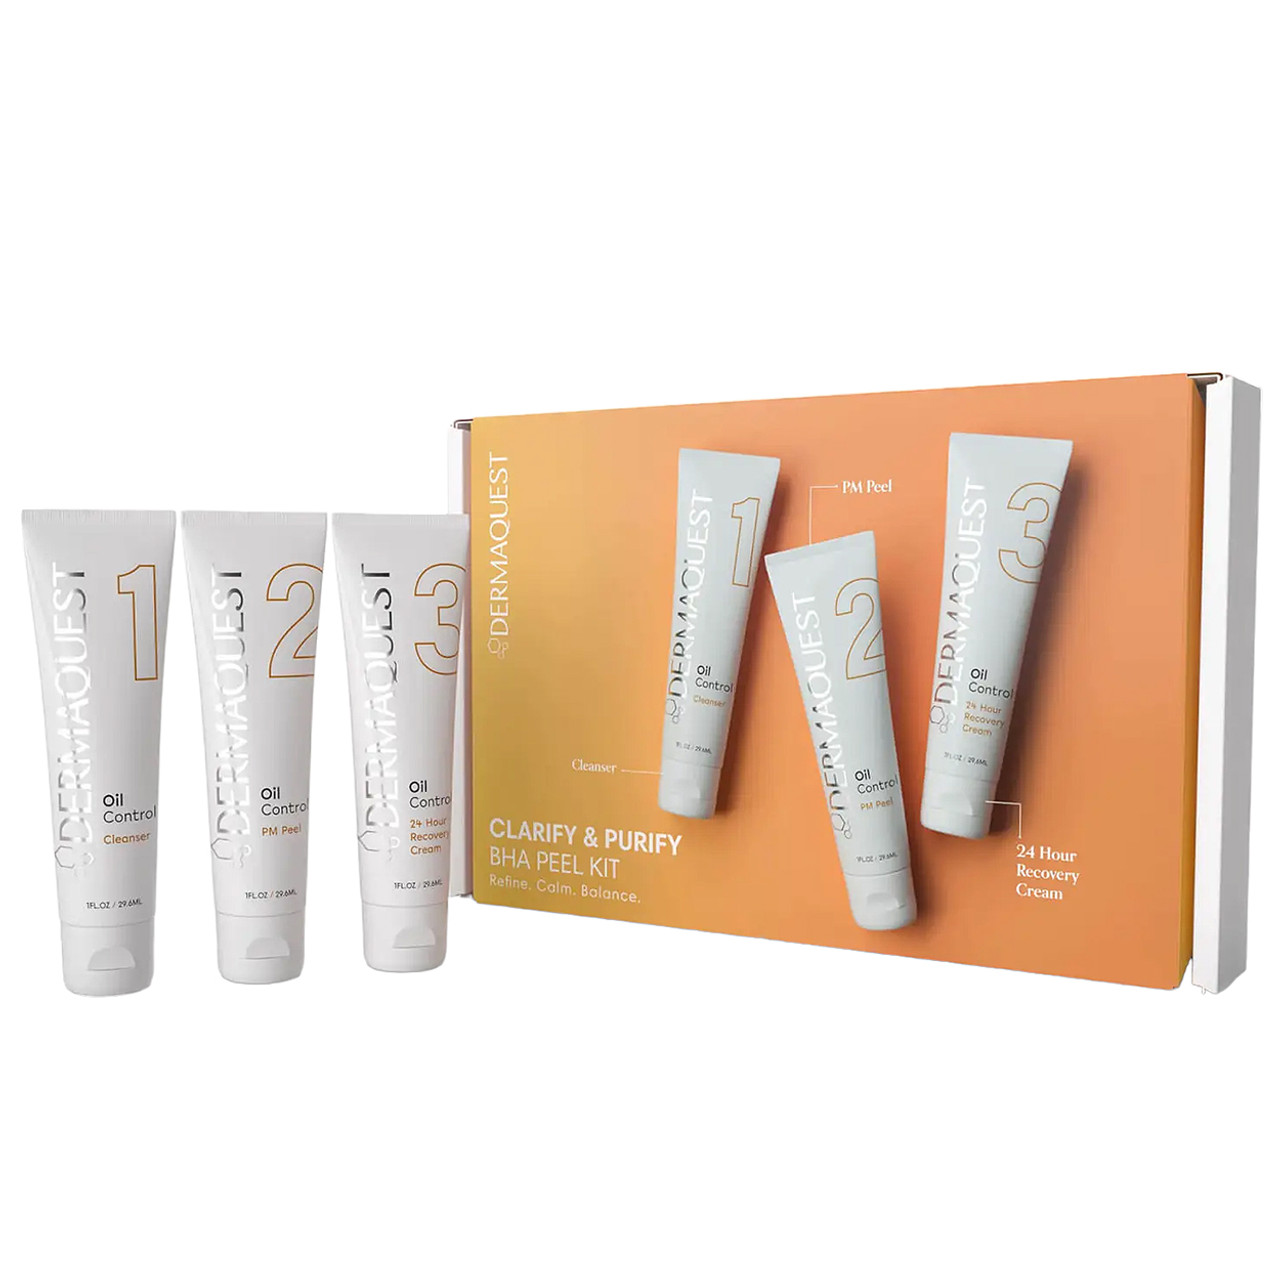 Dermaquest Clarify and Purify BHA Peel Kit 